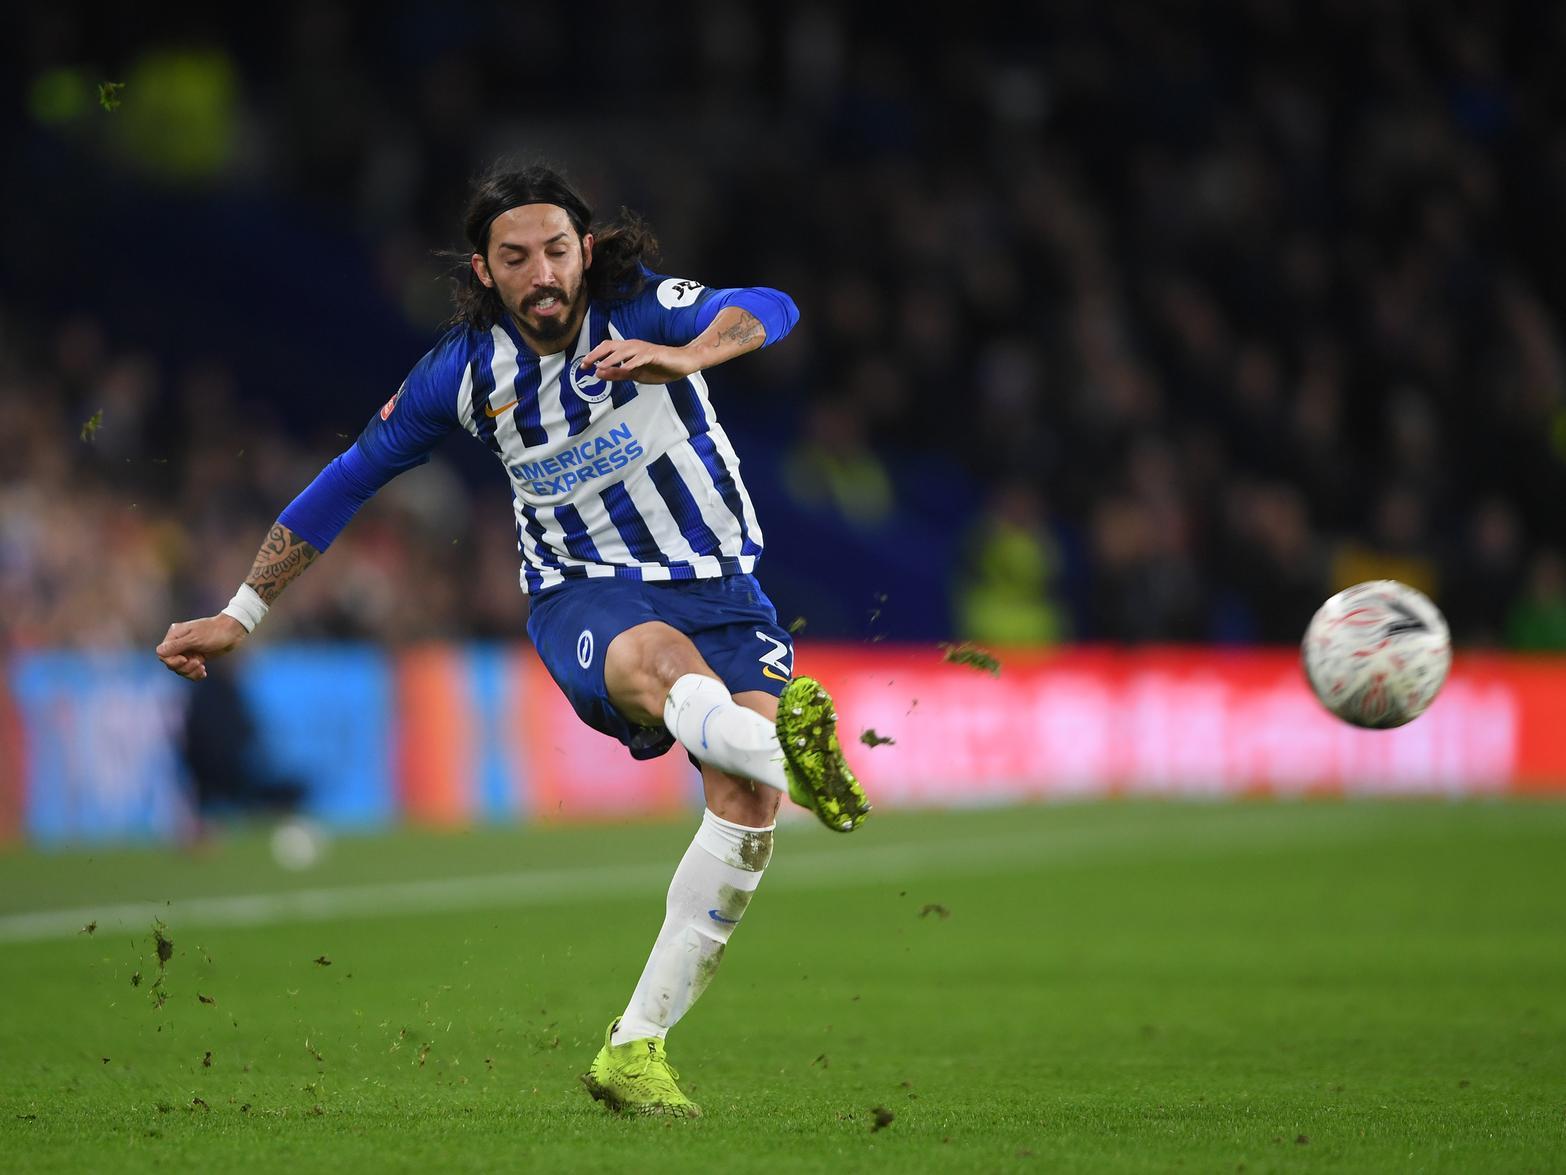 Has been linked with a summer move away from the Amex Stadium, but the bookies aren't yet offering odds on a transfer.